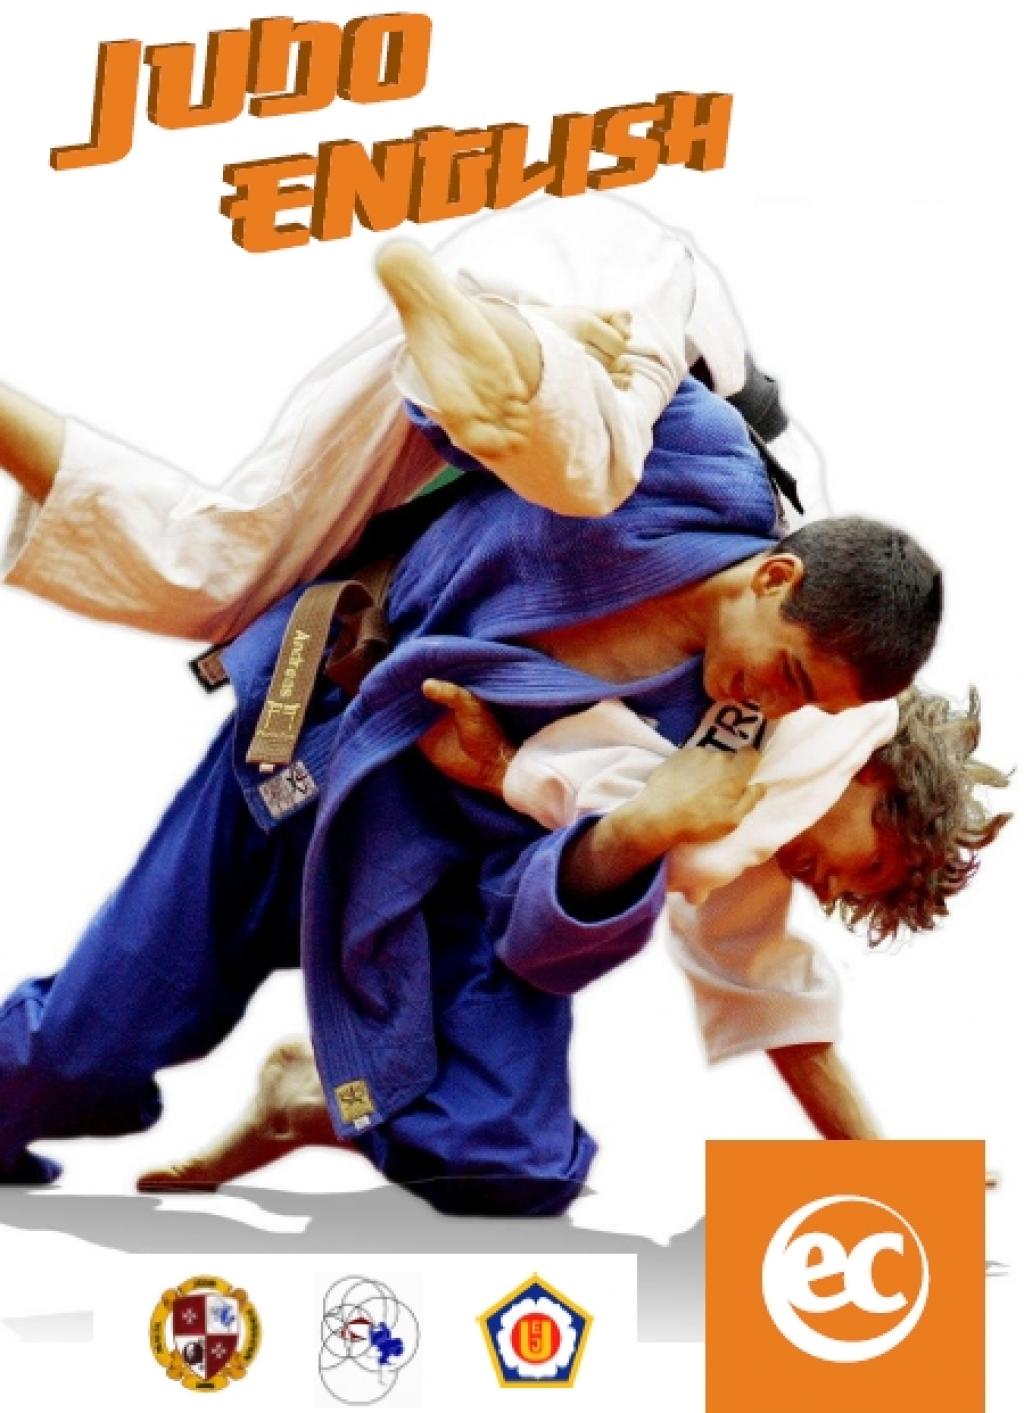 Sign in for the combination course English and judo